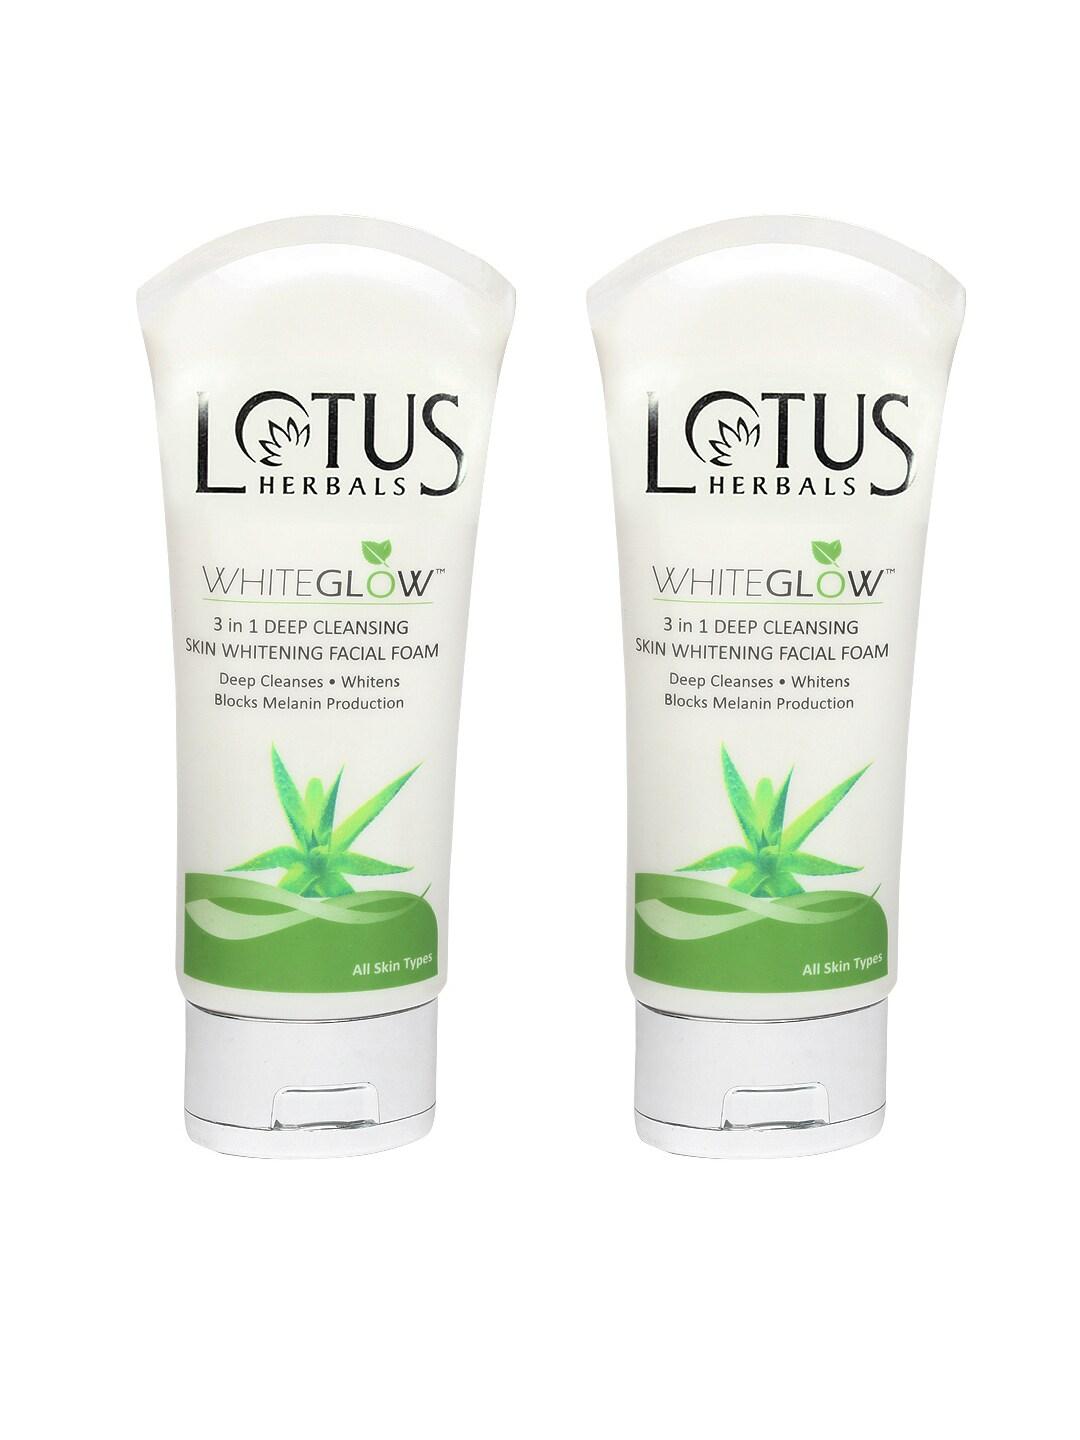 Lotus Herbals Sustainable Pack of 2 Whiteglow 3 in 1 Deep Cleansing Skin Whitening Face Wash